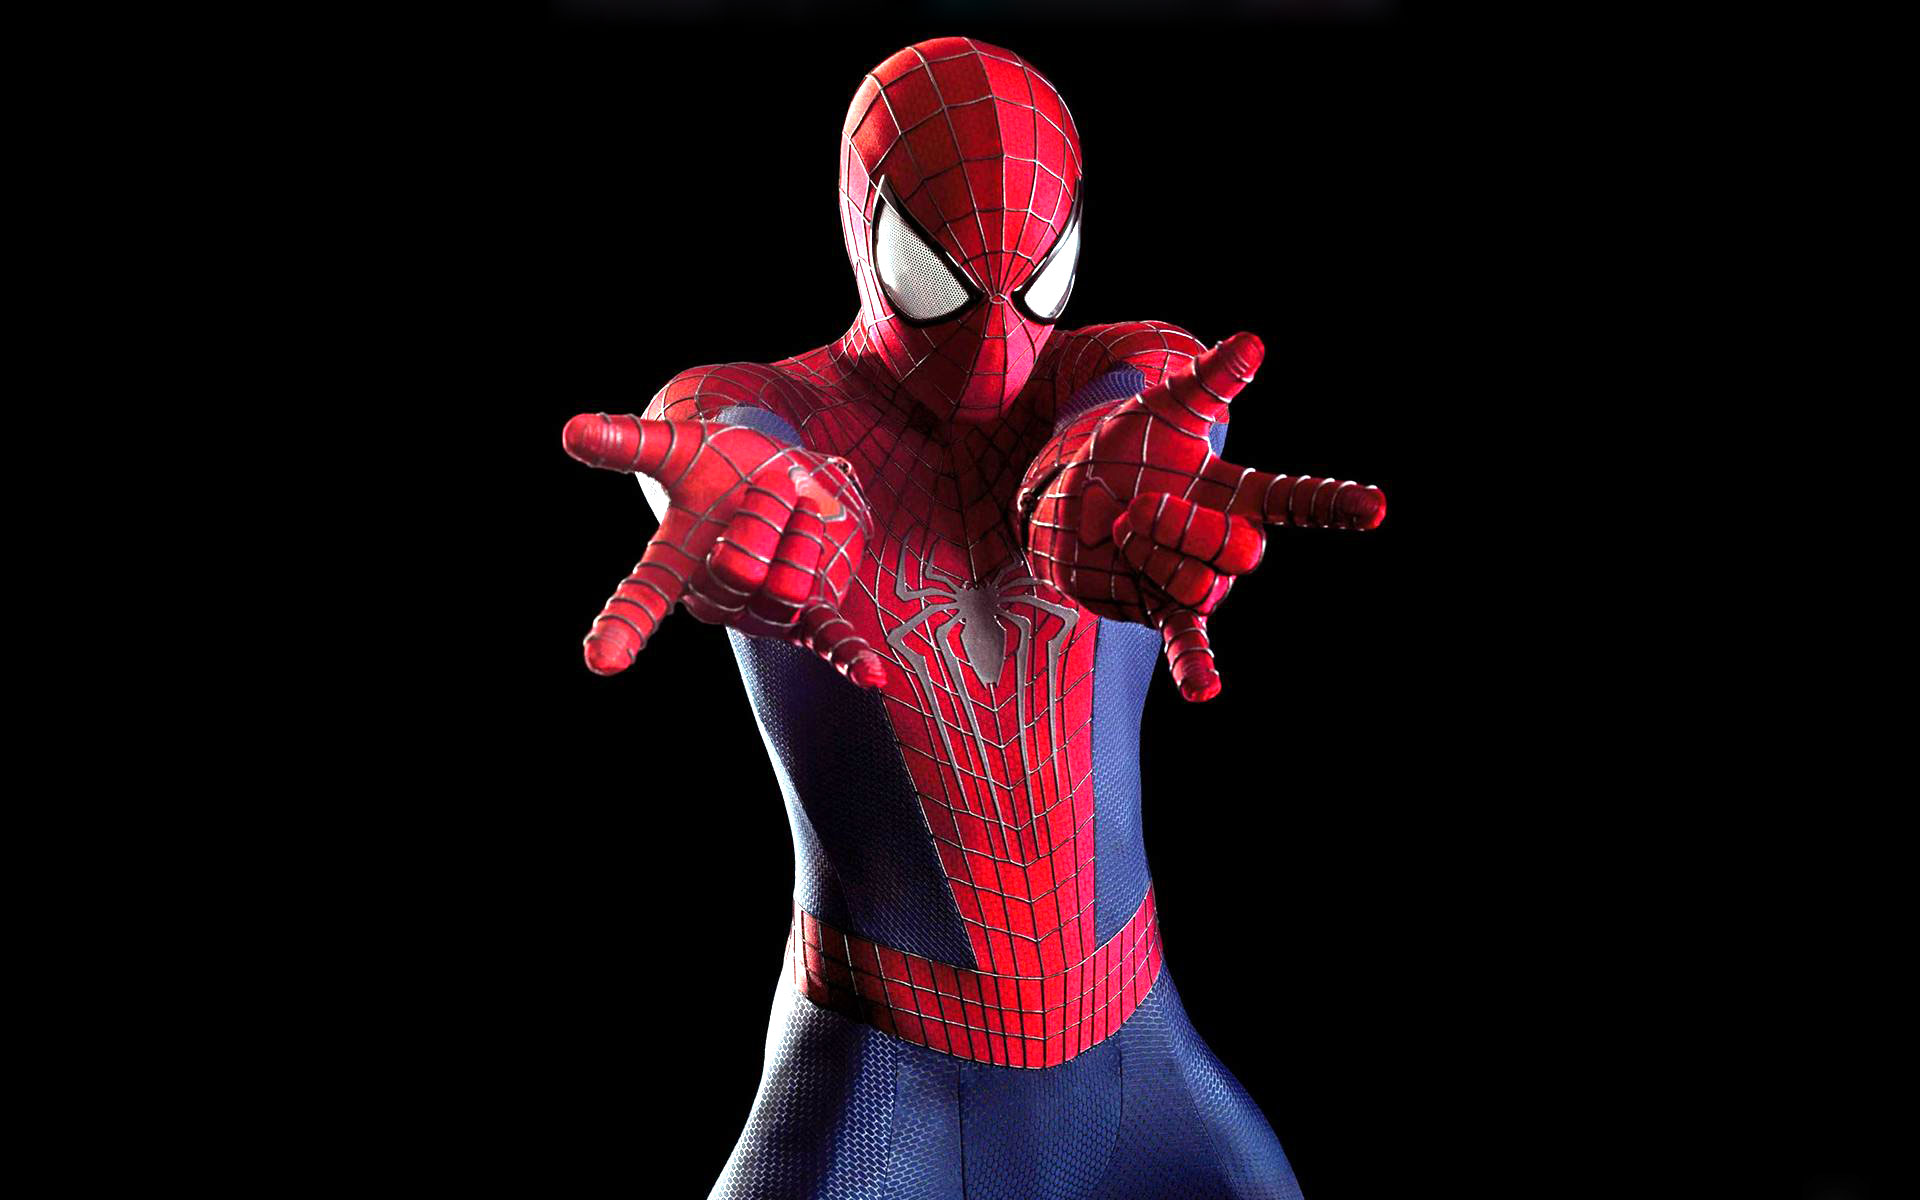 The Amazing Spider-man 2 Wallpaper (8 to Choose From) - Movie ...